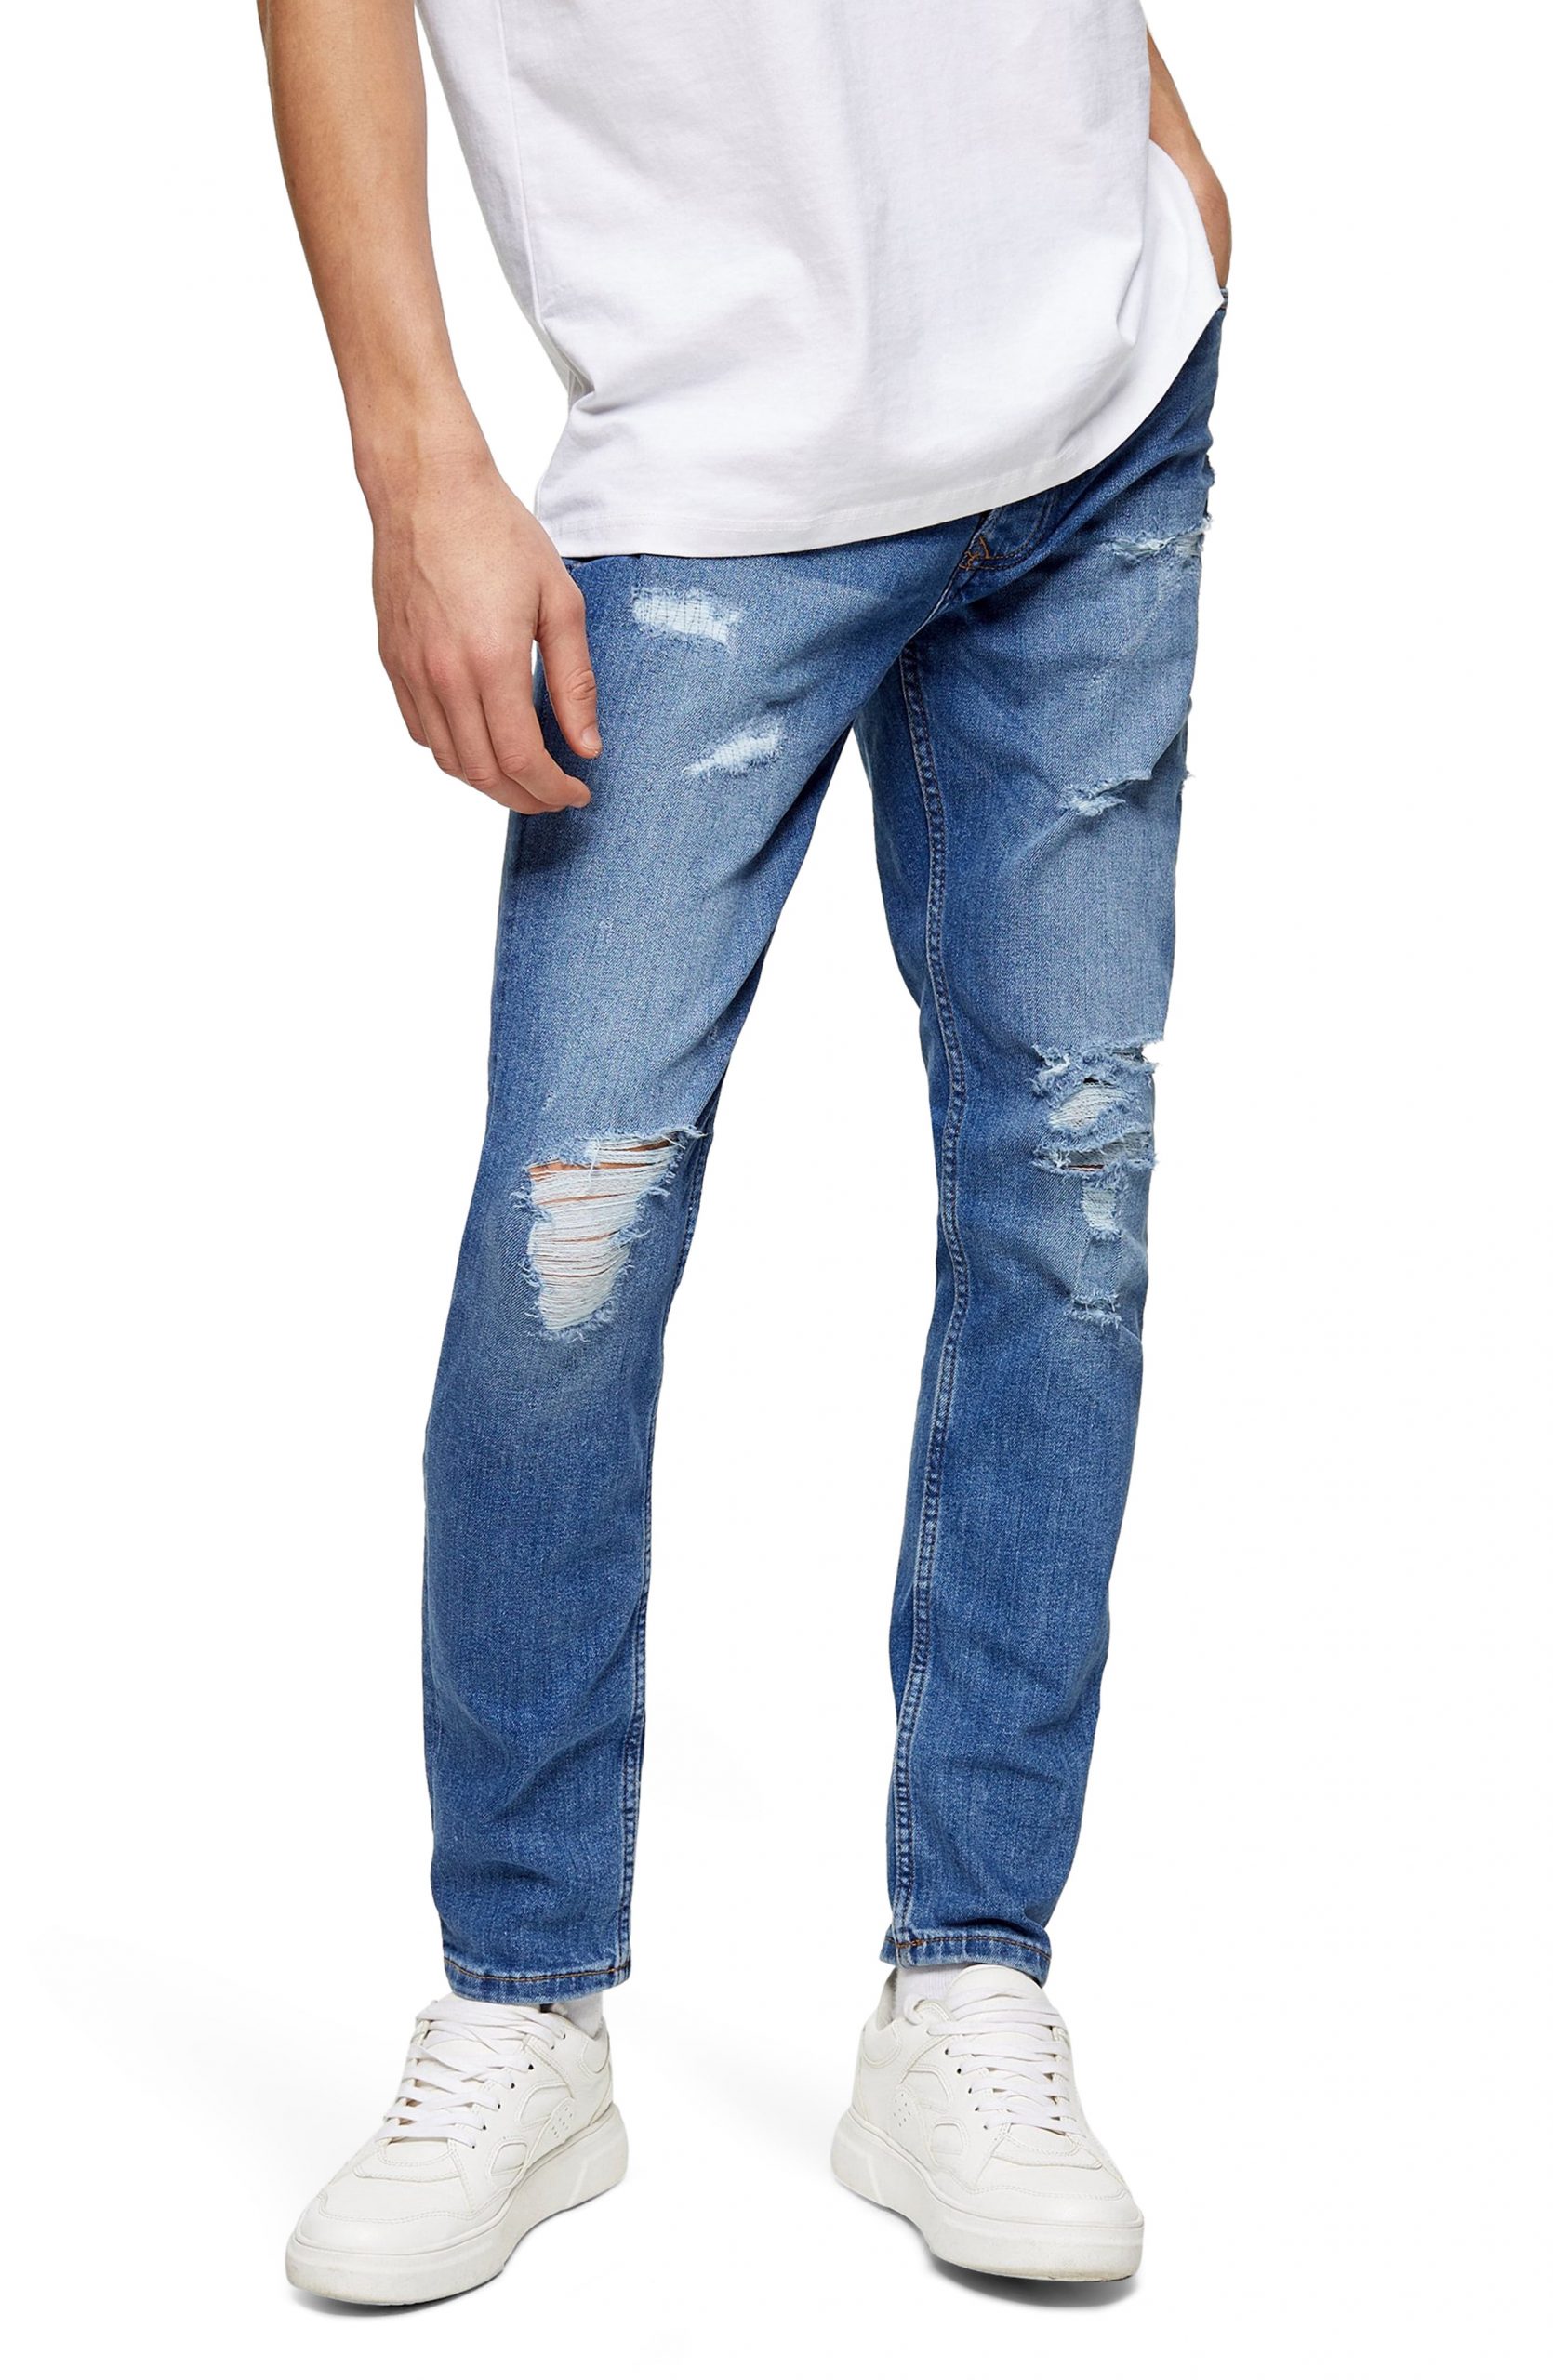 Mens Topman Ripped Skinny Jeans Size 30 X 32 Blue The Fashionisto 